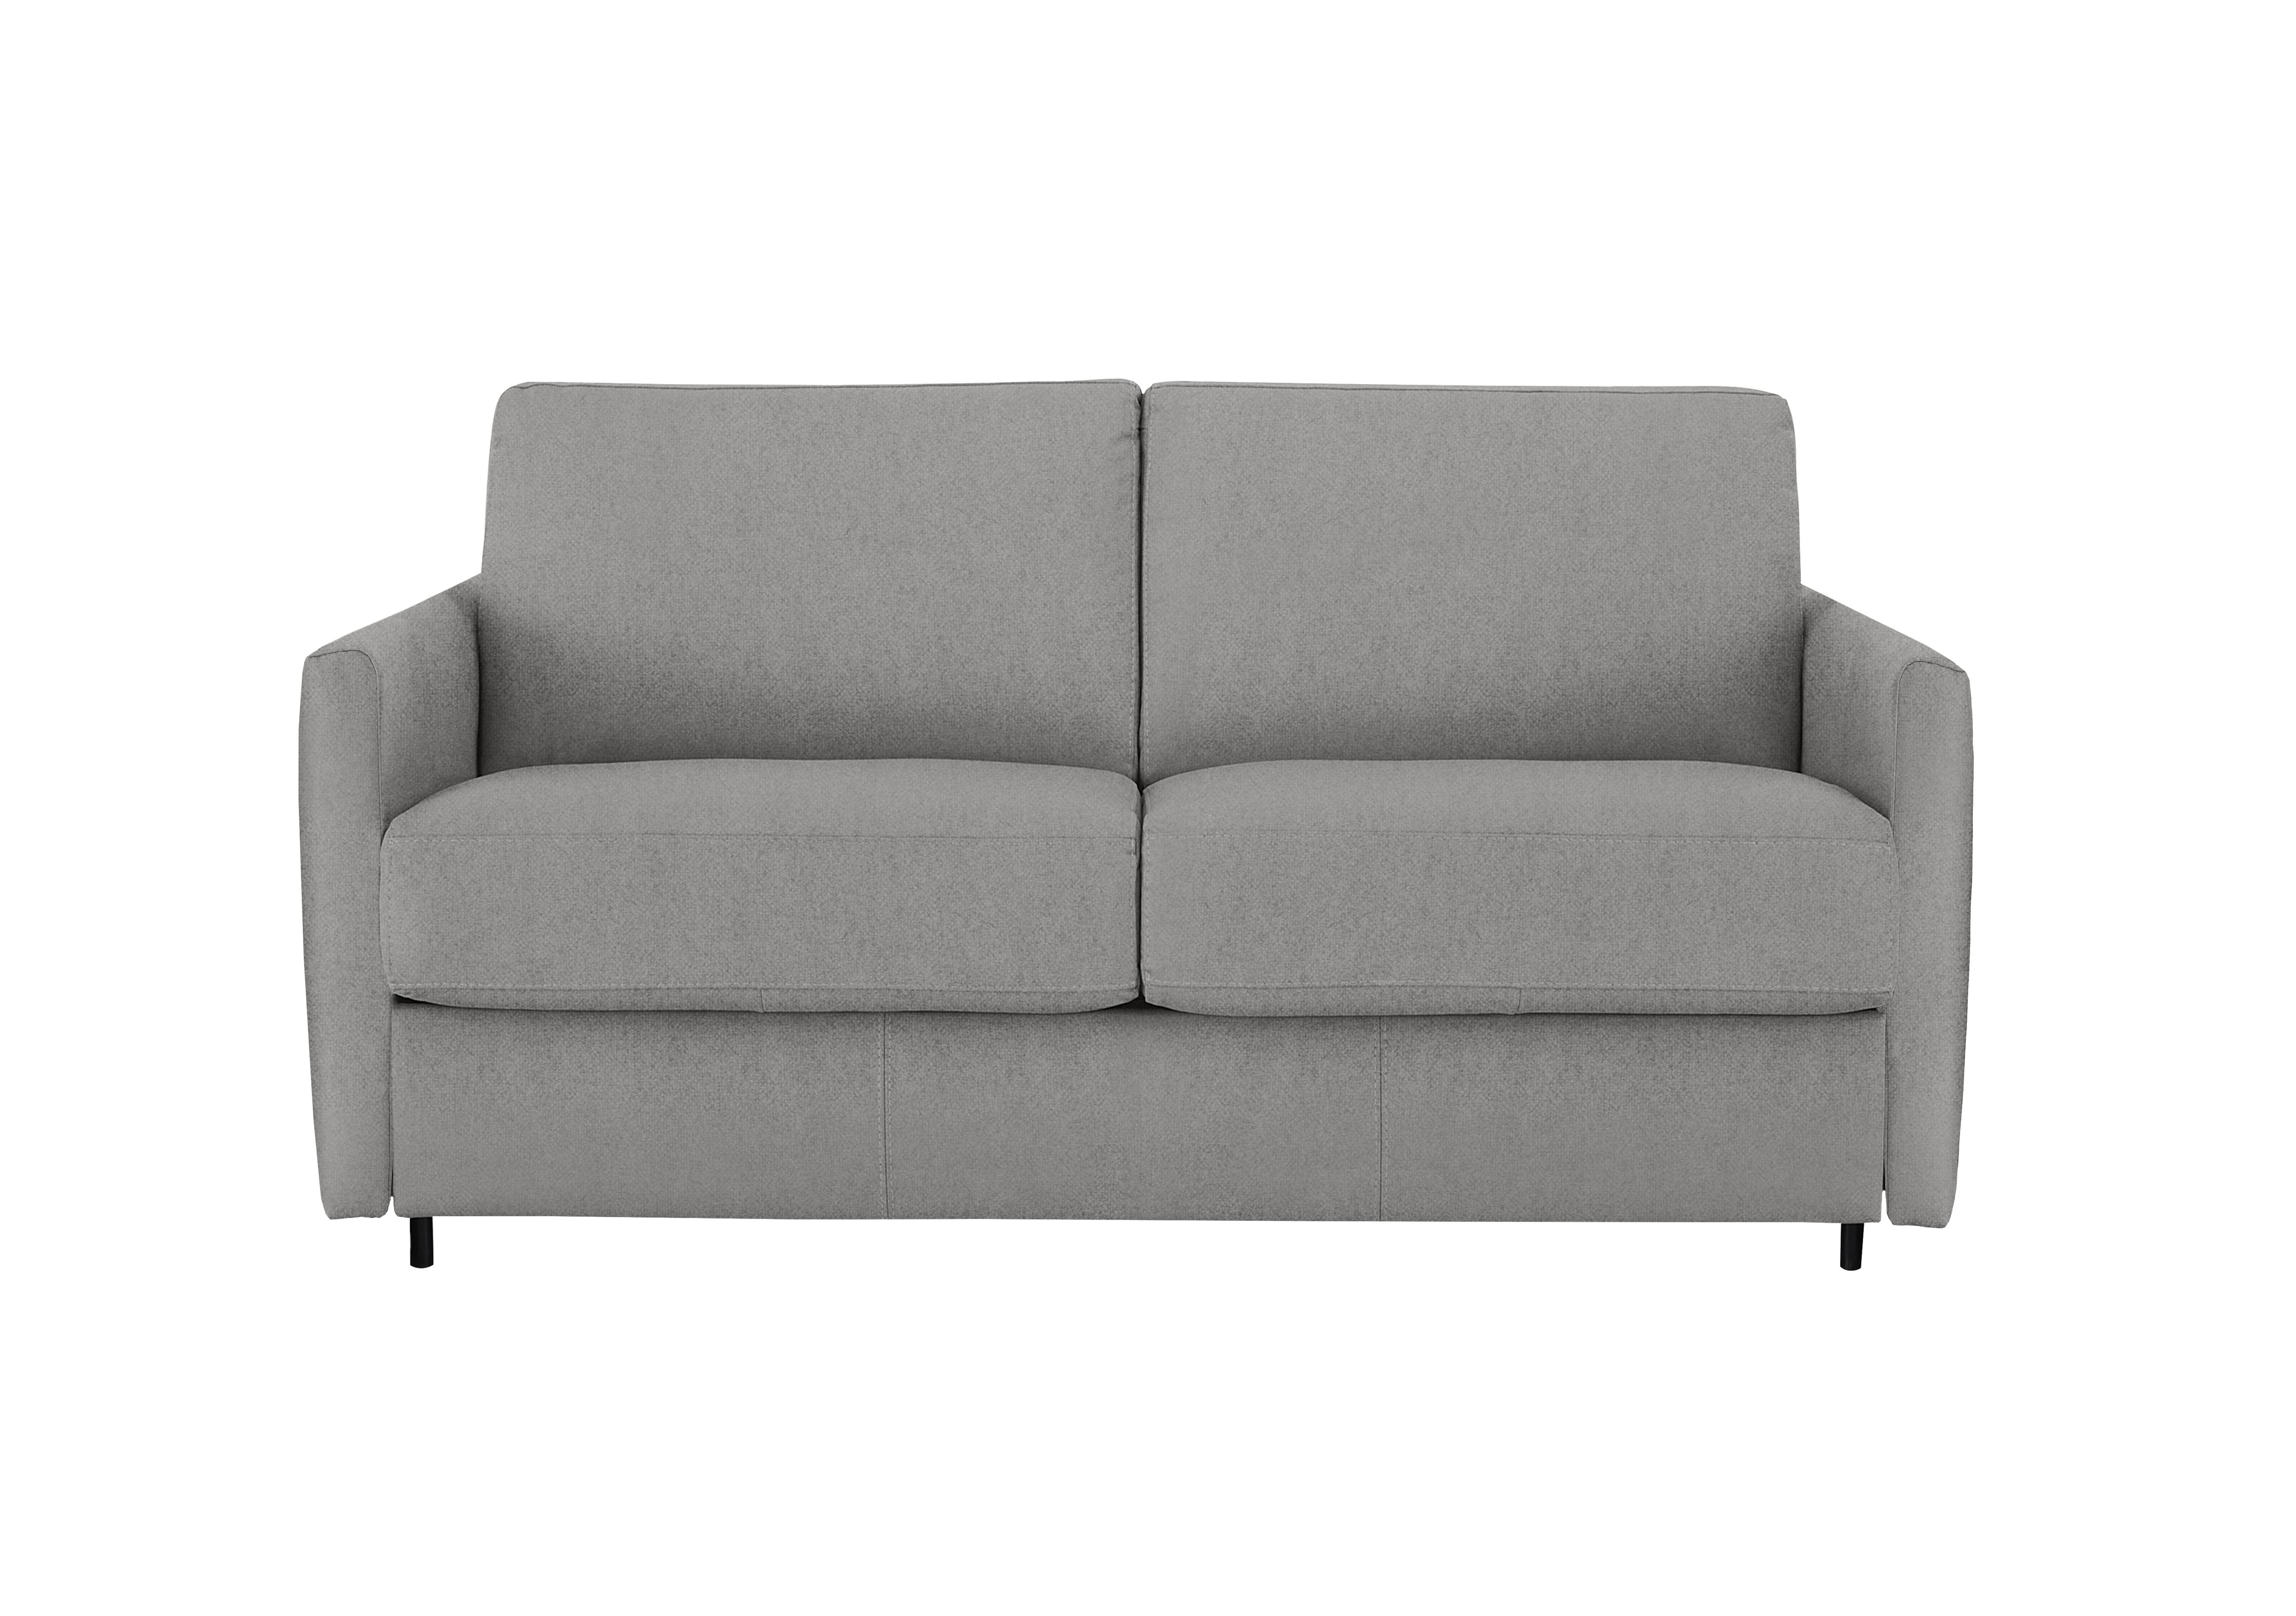 Alcova 2 Seater Fabric Sofa Bed with Slim Arms in Fuente Ash on Furniture Village